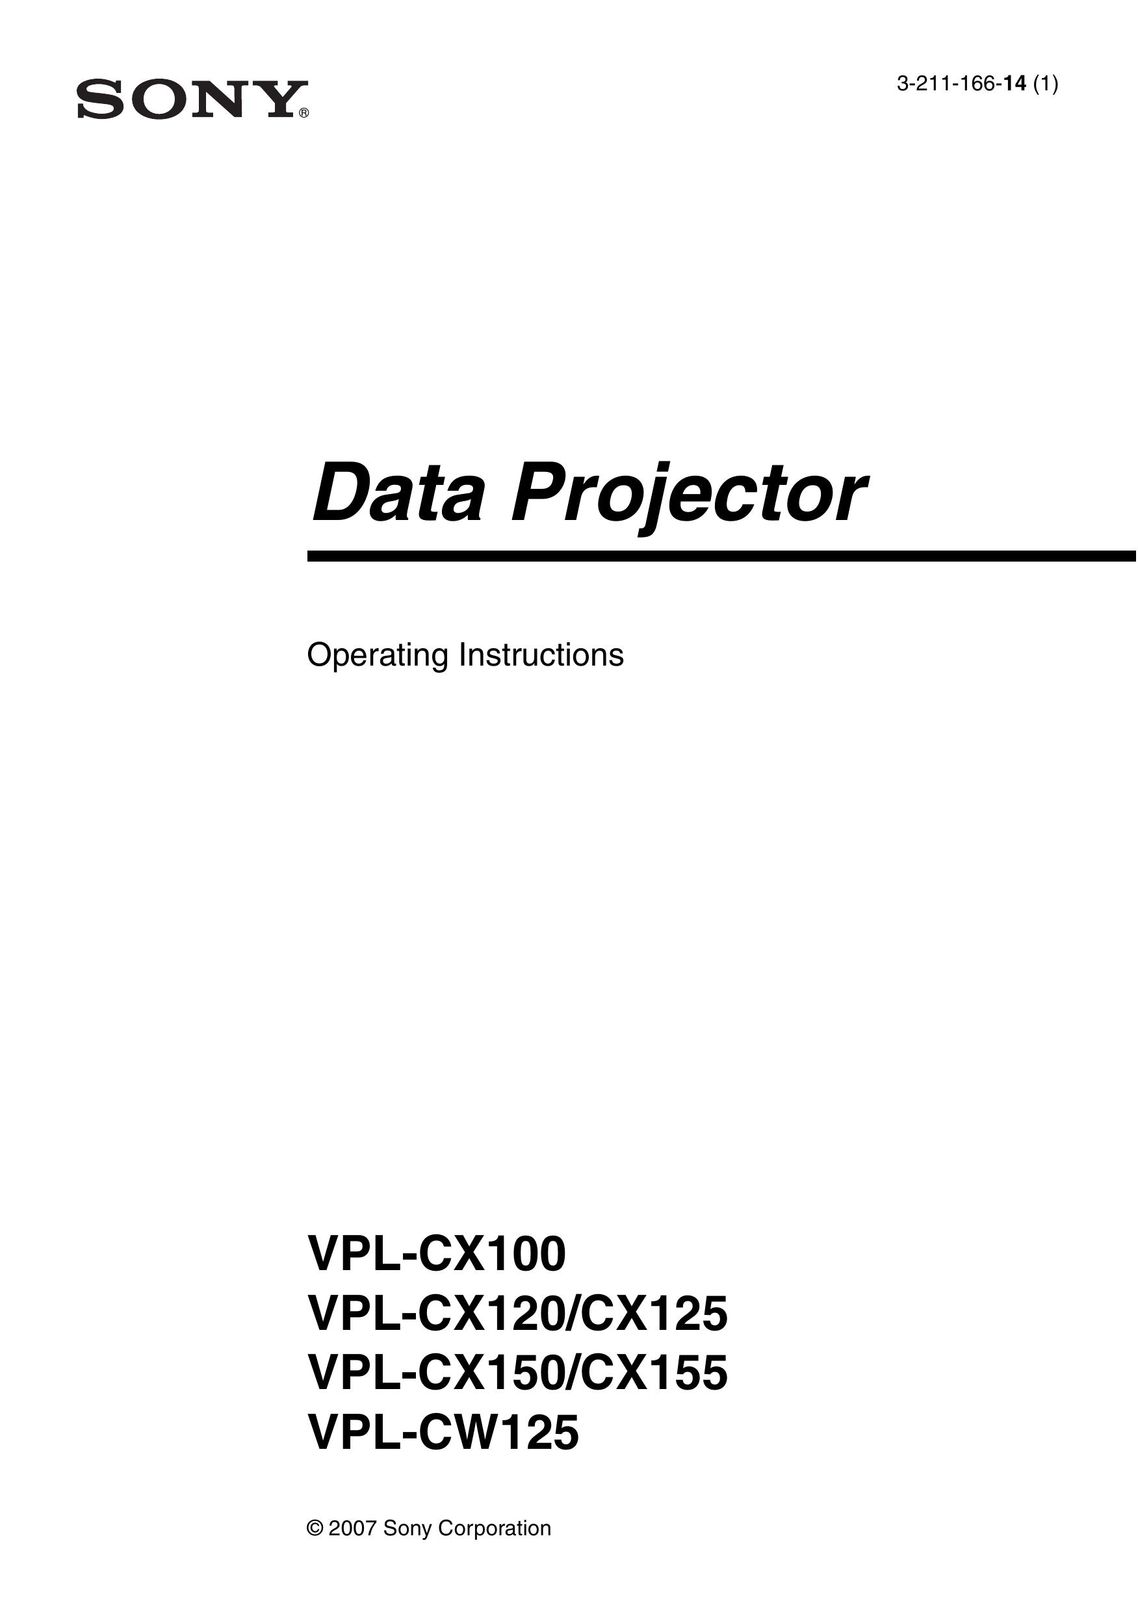 Sony CX155 Projector User Manual